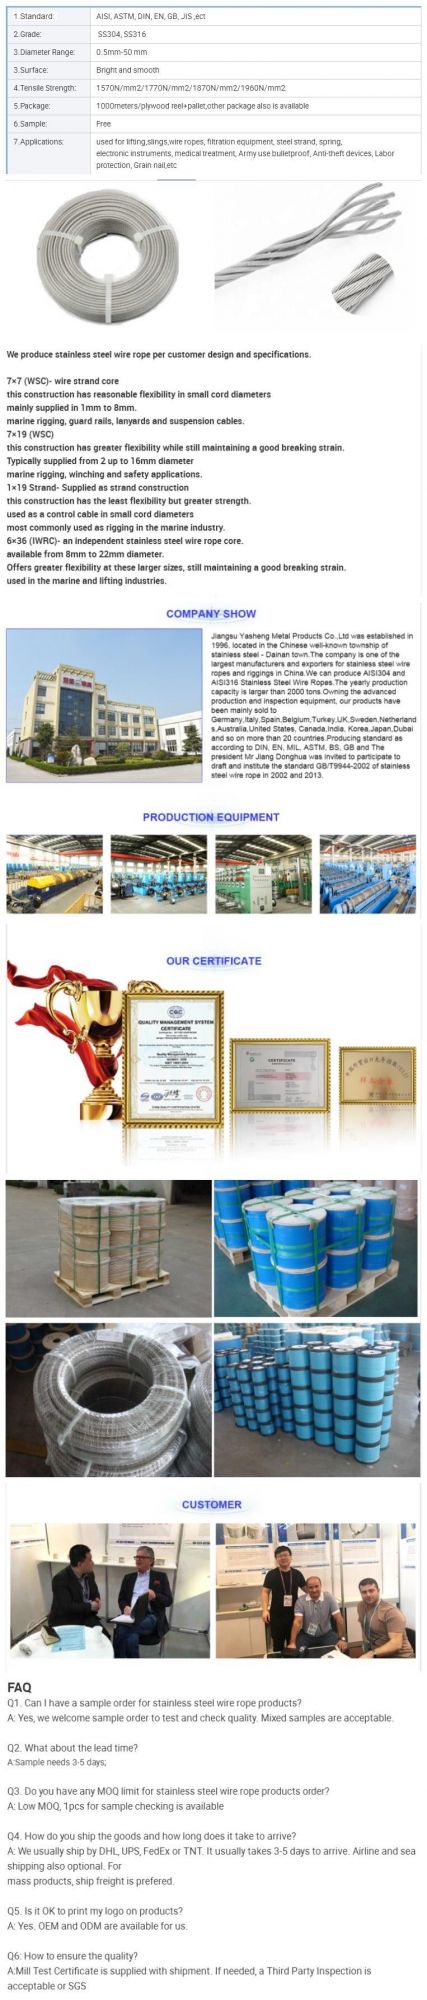 Stainless Wire Rope Factory Selling Top Quality